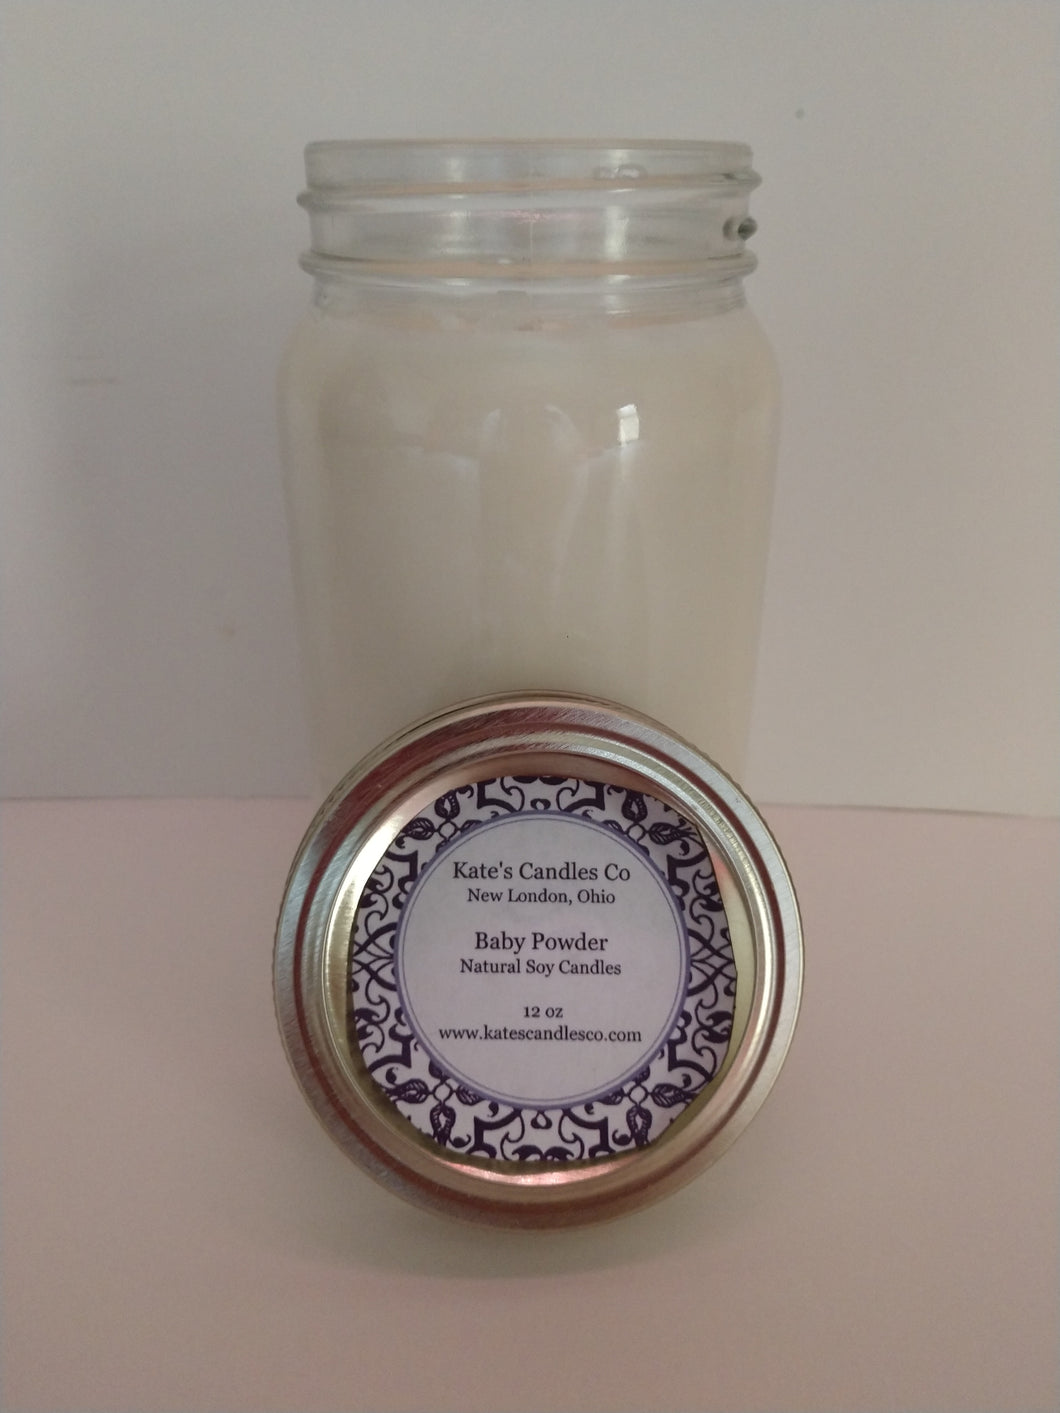 Baby Powder - Small Jar Candle - Hearth & Home Candle Company